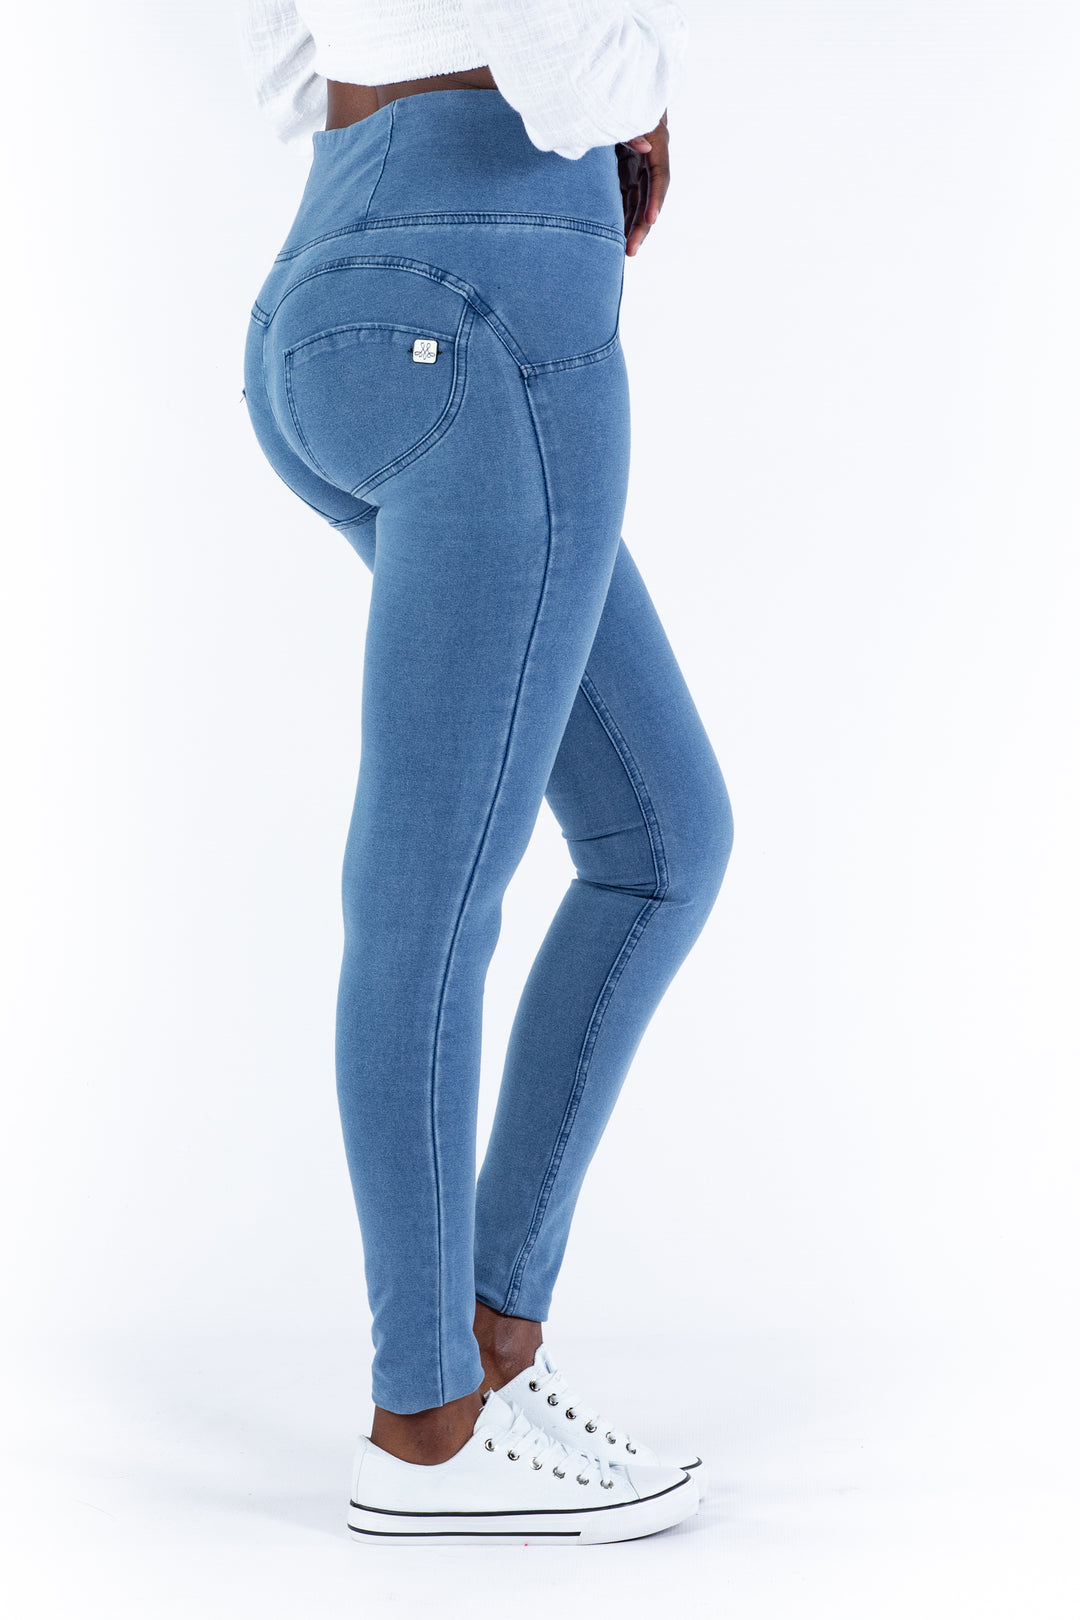 High waist Butt lifting Shaping jeans/Jeggings - Light blueaos-init aos-animate